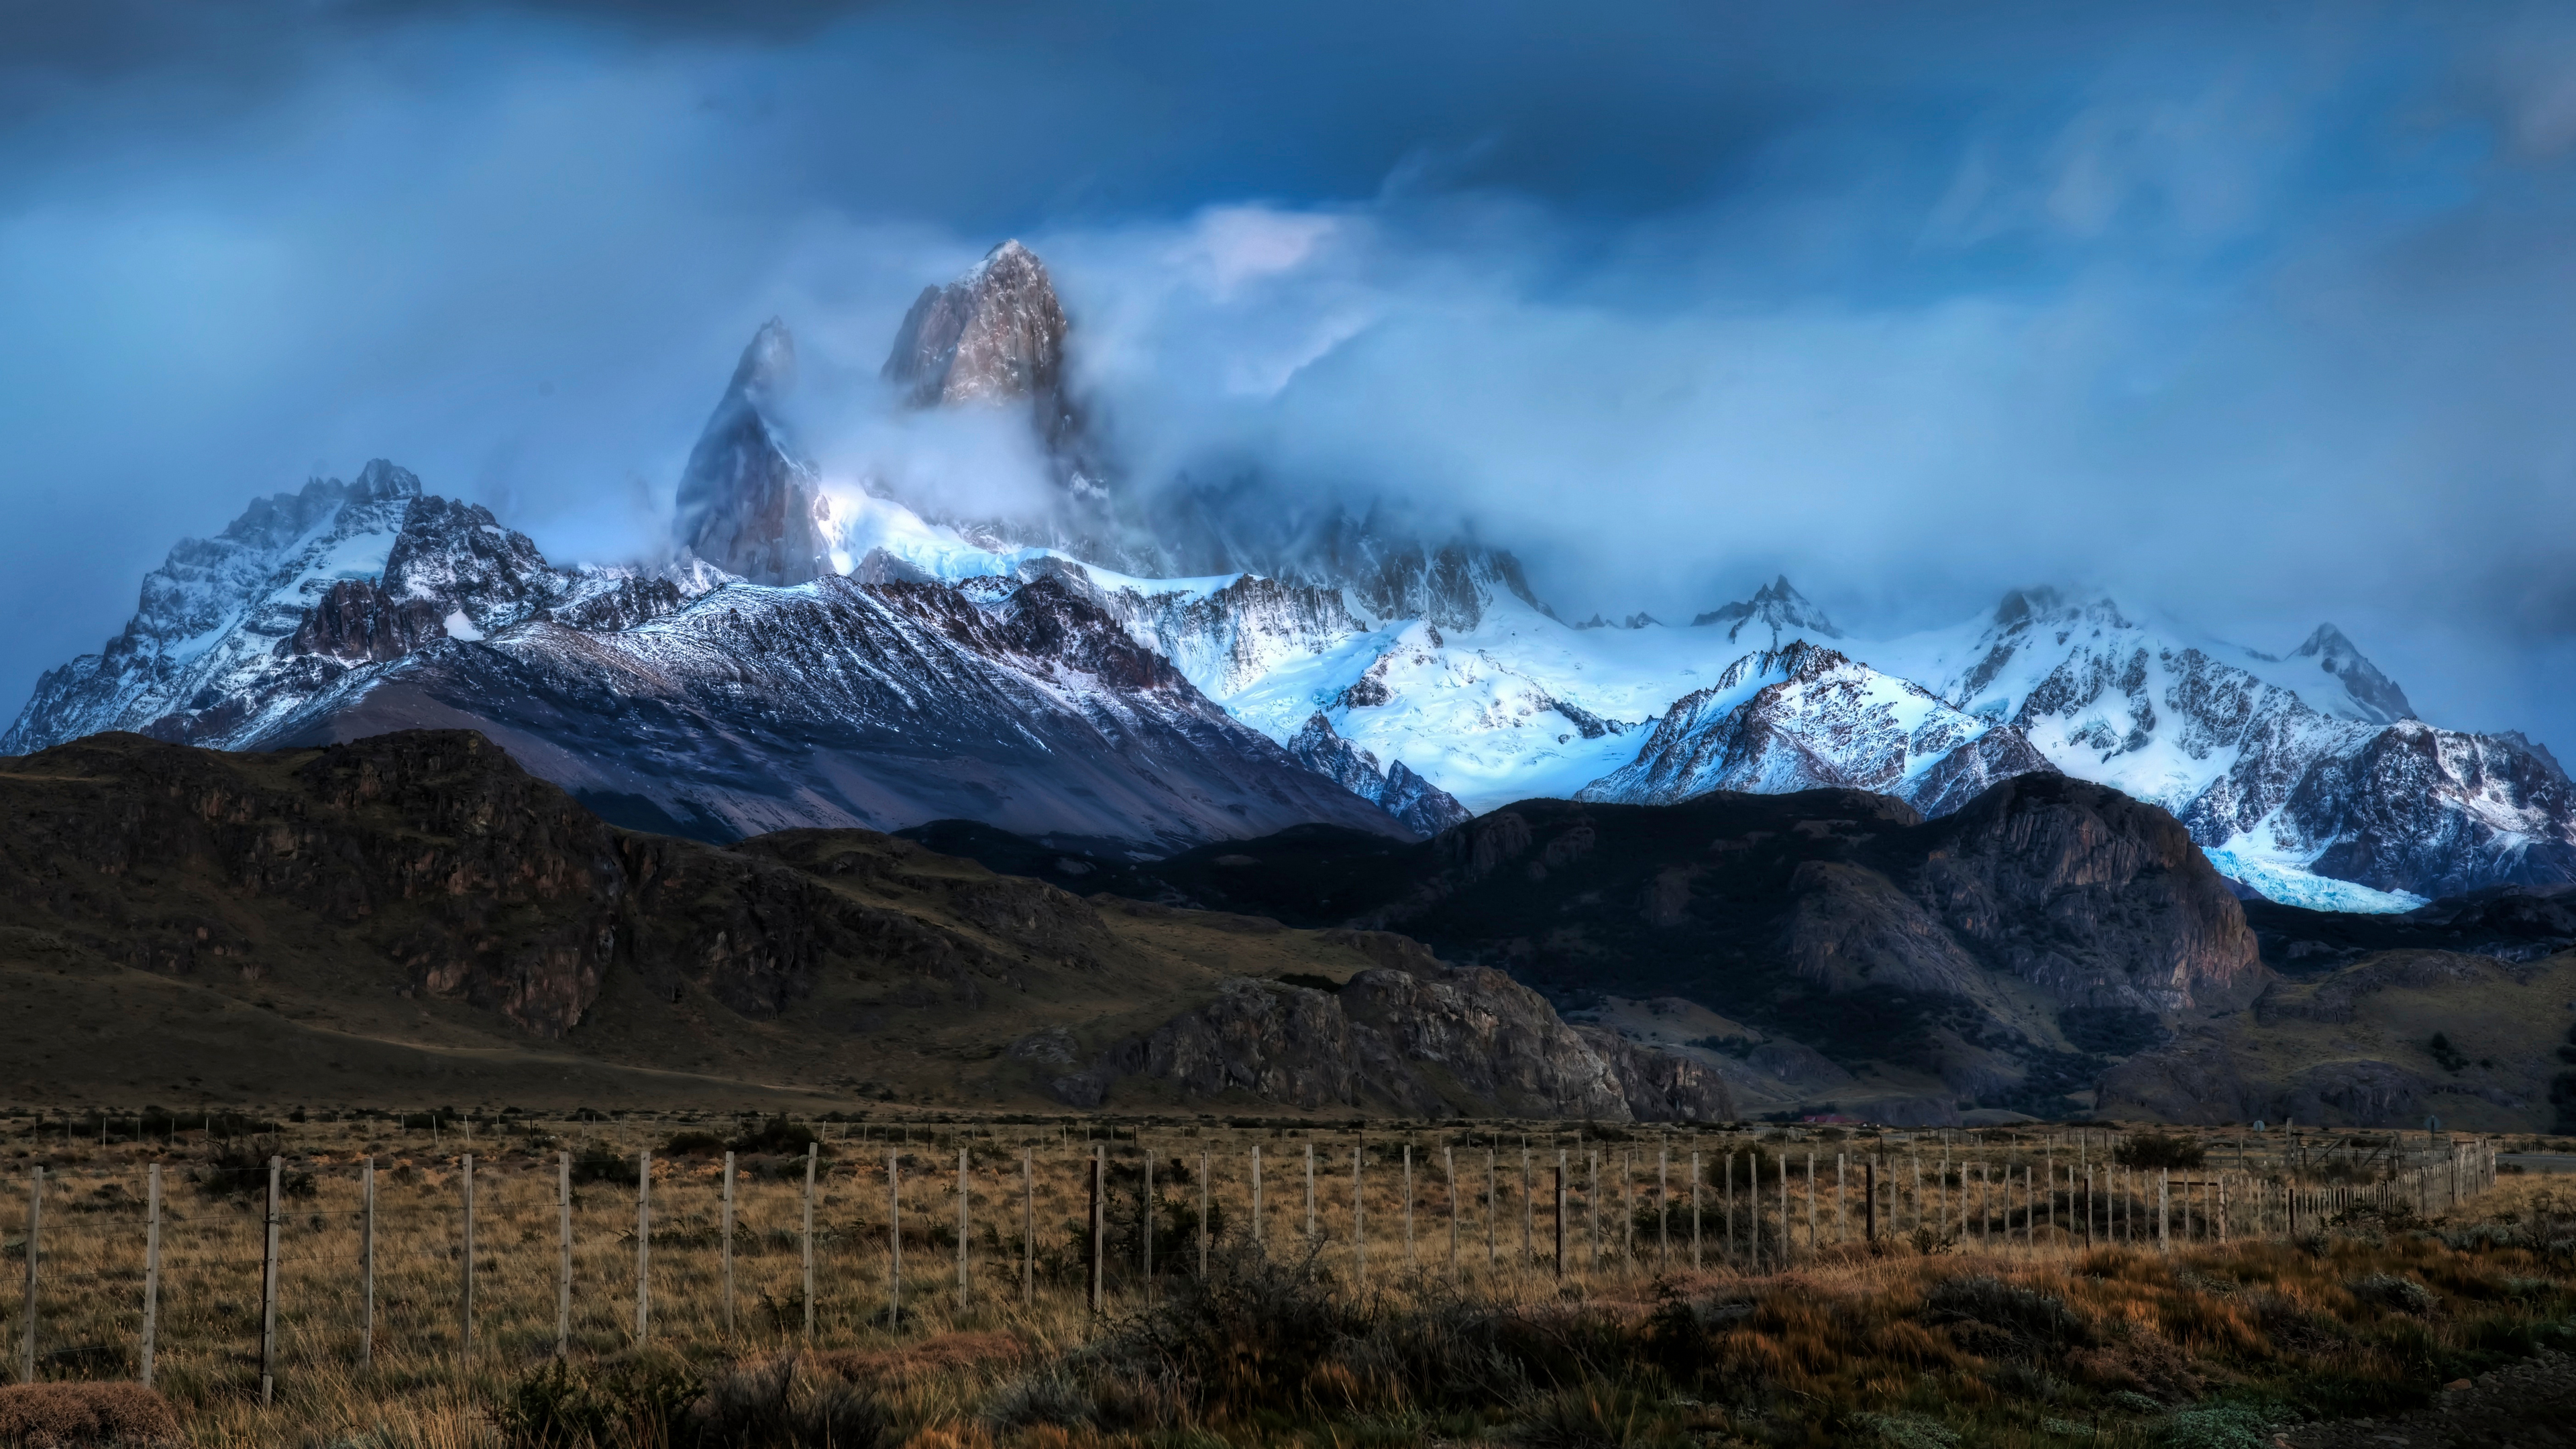 General 3840x2160 Trey Ratcliff photography landscape Argentina mountain chain mountain top snow clouds hills rocks field nature mountains